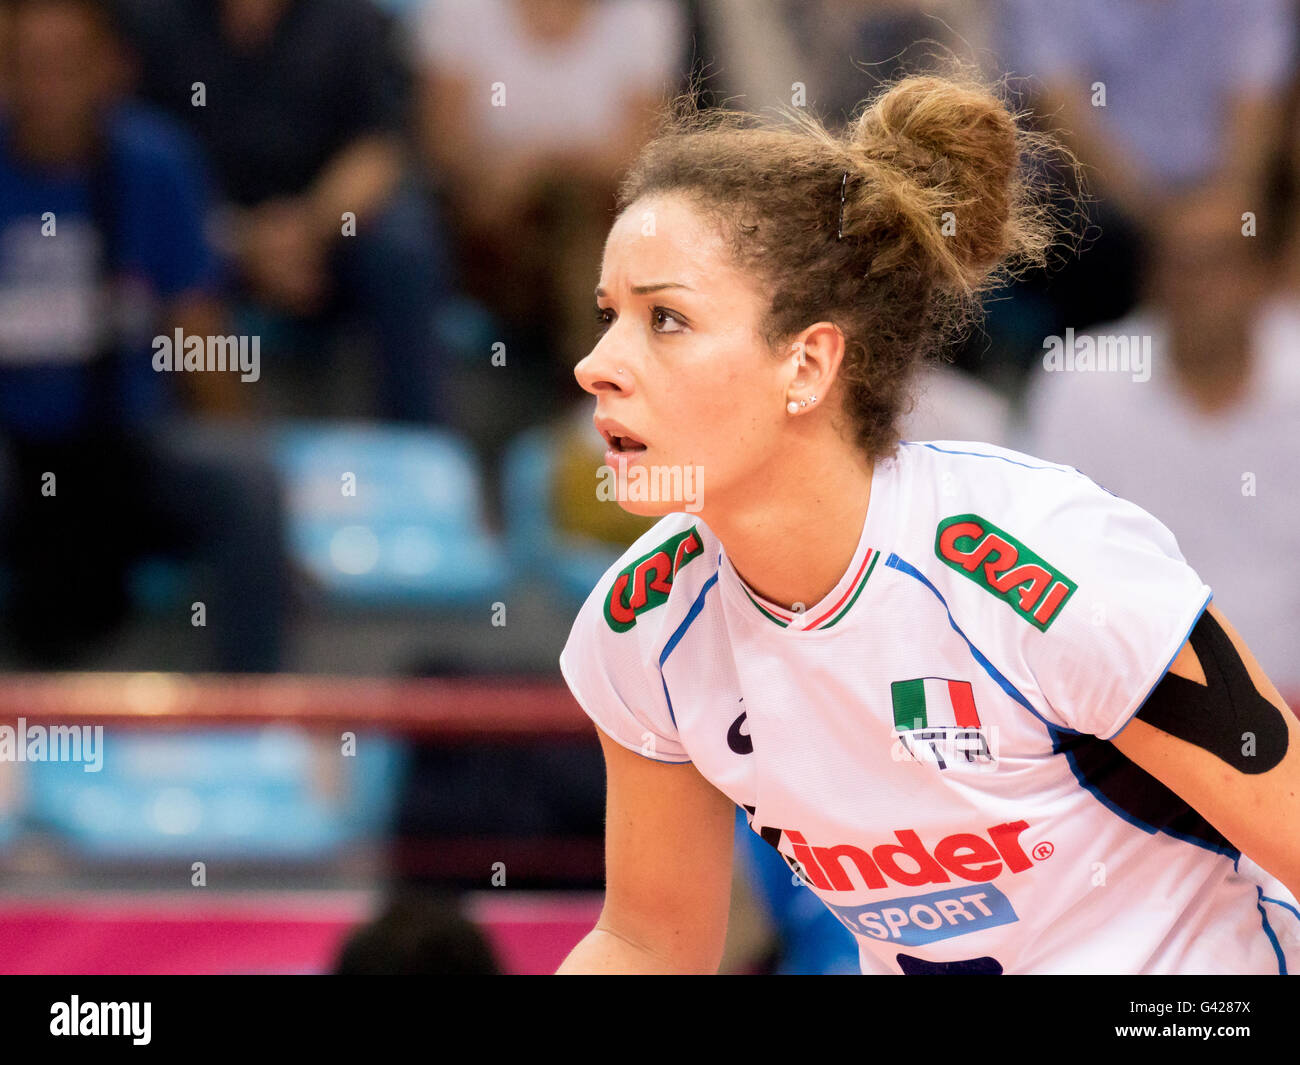 Bari, Italy. 17th June, 2016. Monica De Gennaro from Italy in action during the FIVB World Grand Prix 2016 Pool F1 Group 1 Women match between Thailand and Italy at PalaFlorio sports hall. Nicola Mastronardi/Alamy Live News Stock Photo